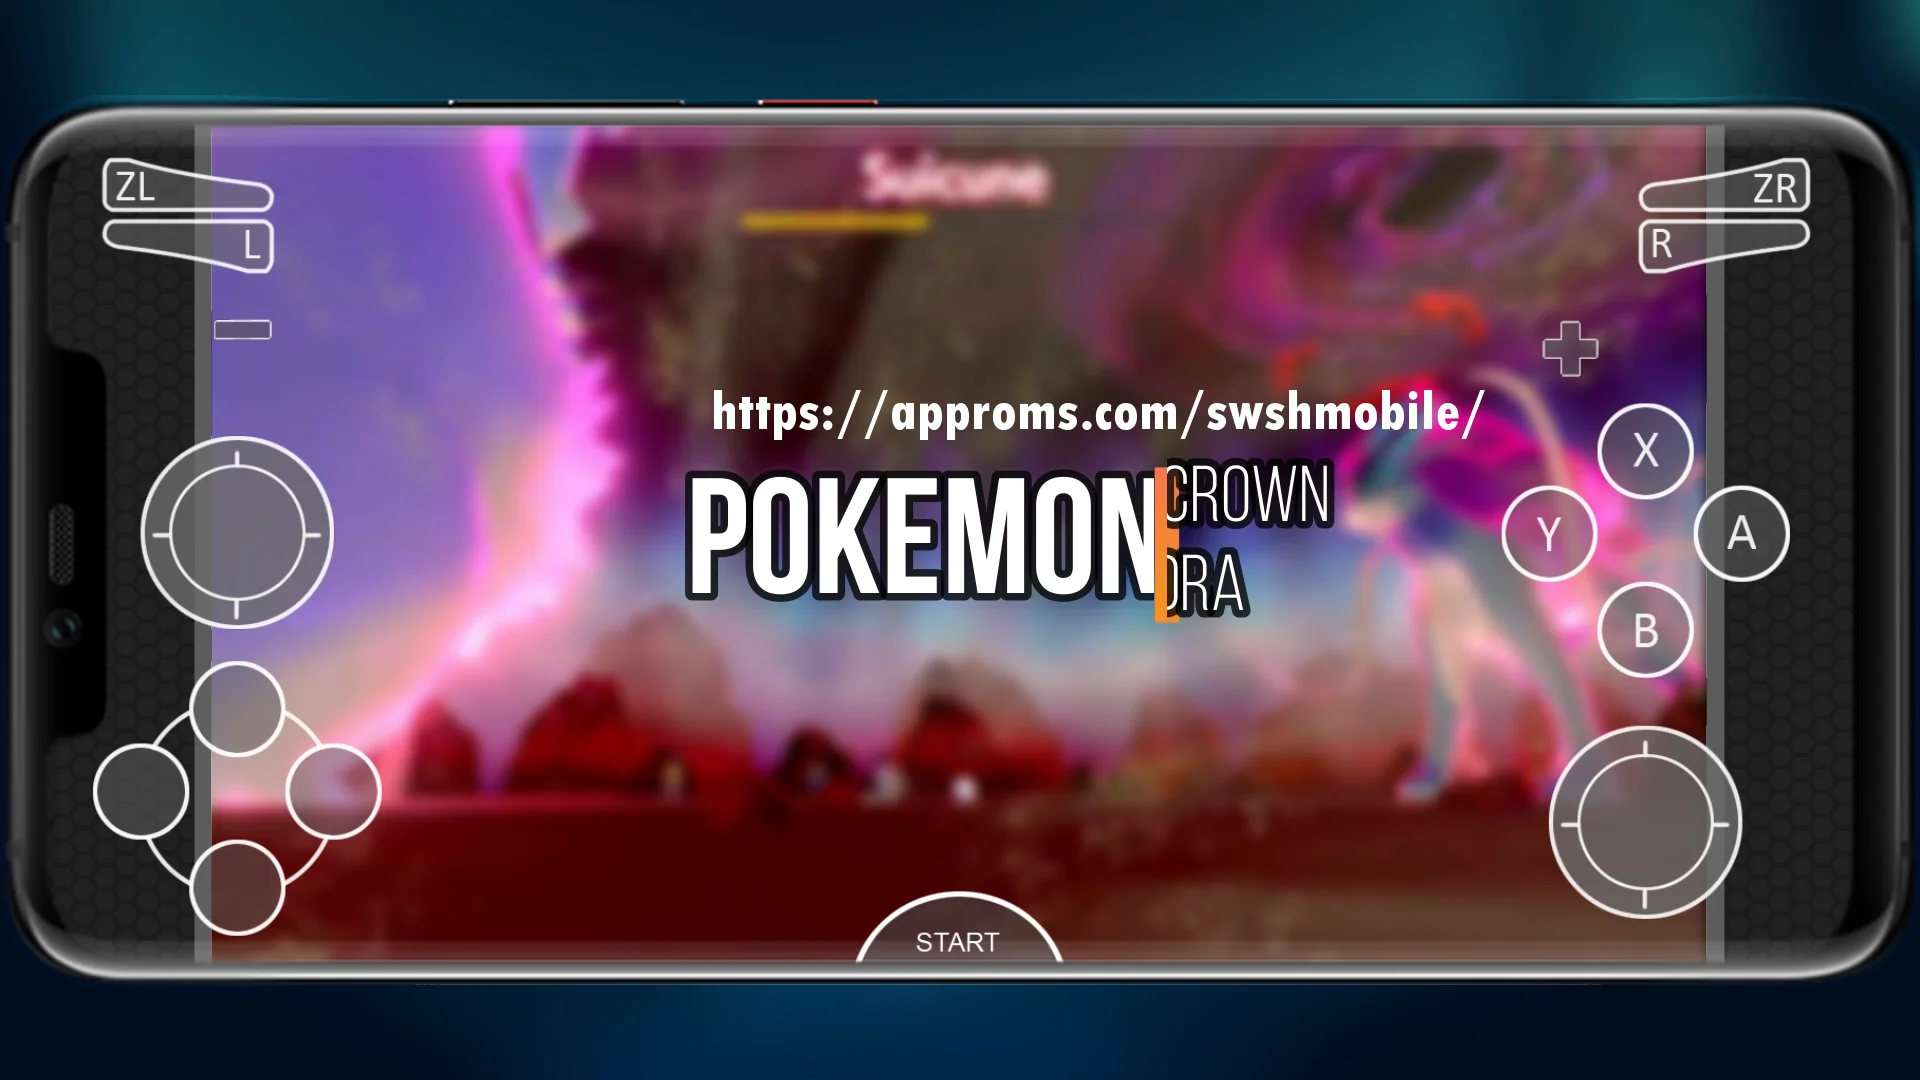 How To Download Pokemon Sword The Isle of Armor DLC On Android I Download  Now I Finally Launched For Android on Vimeo